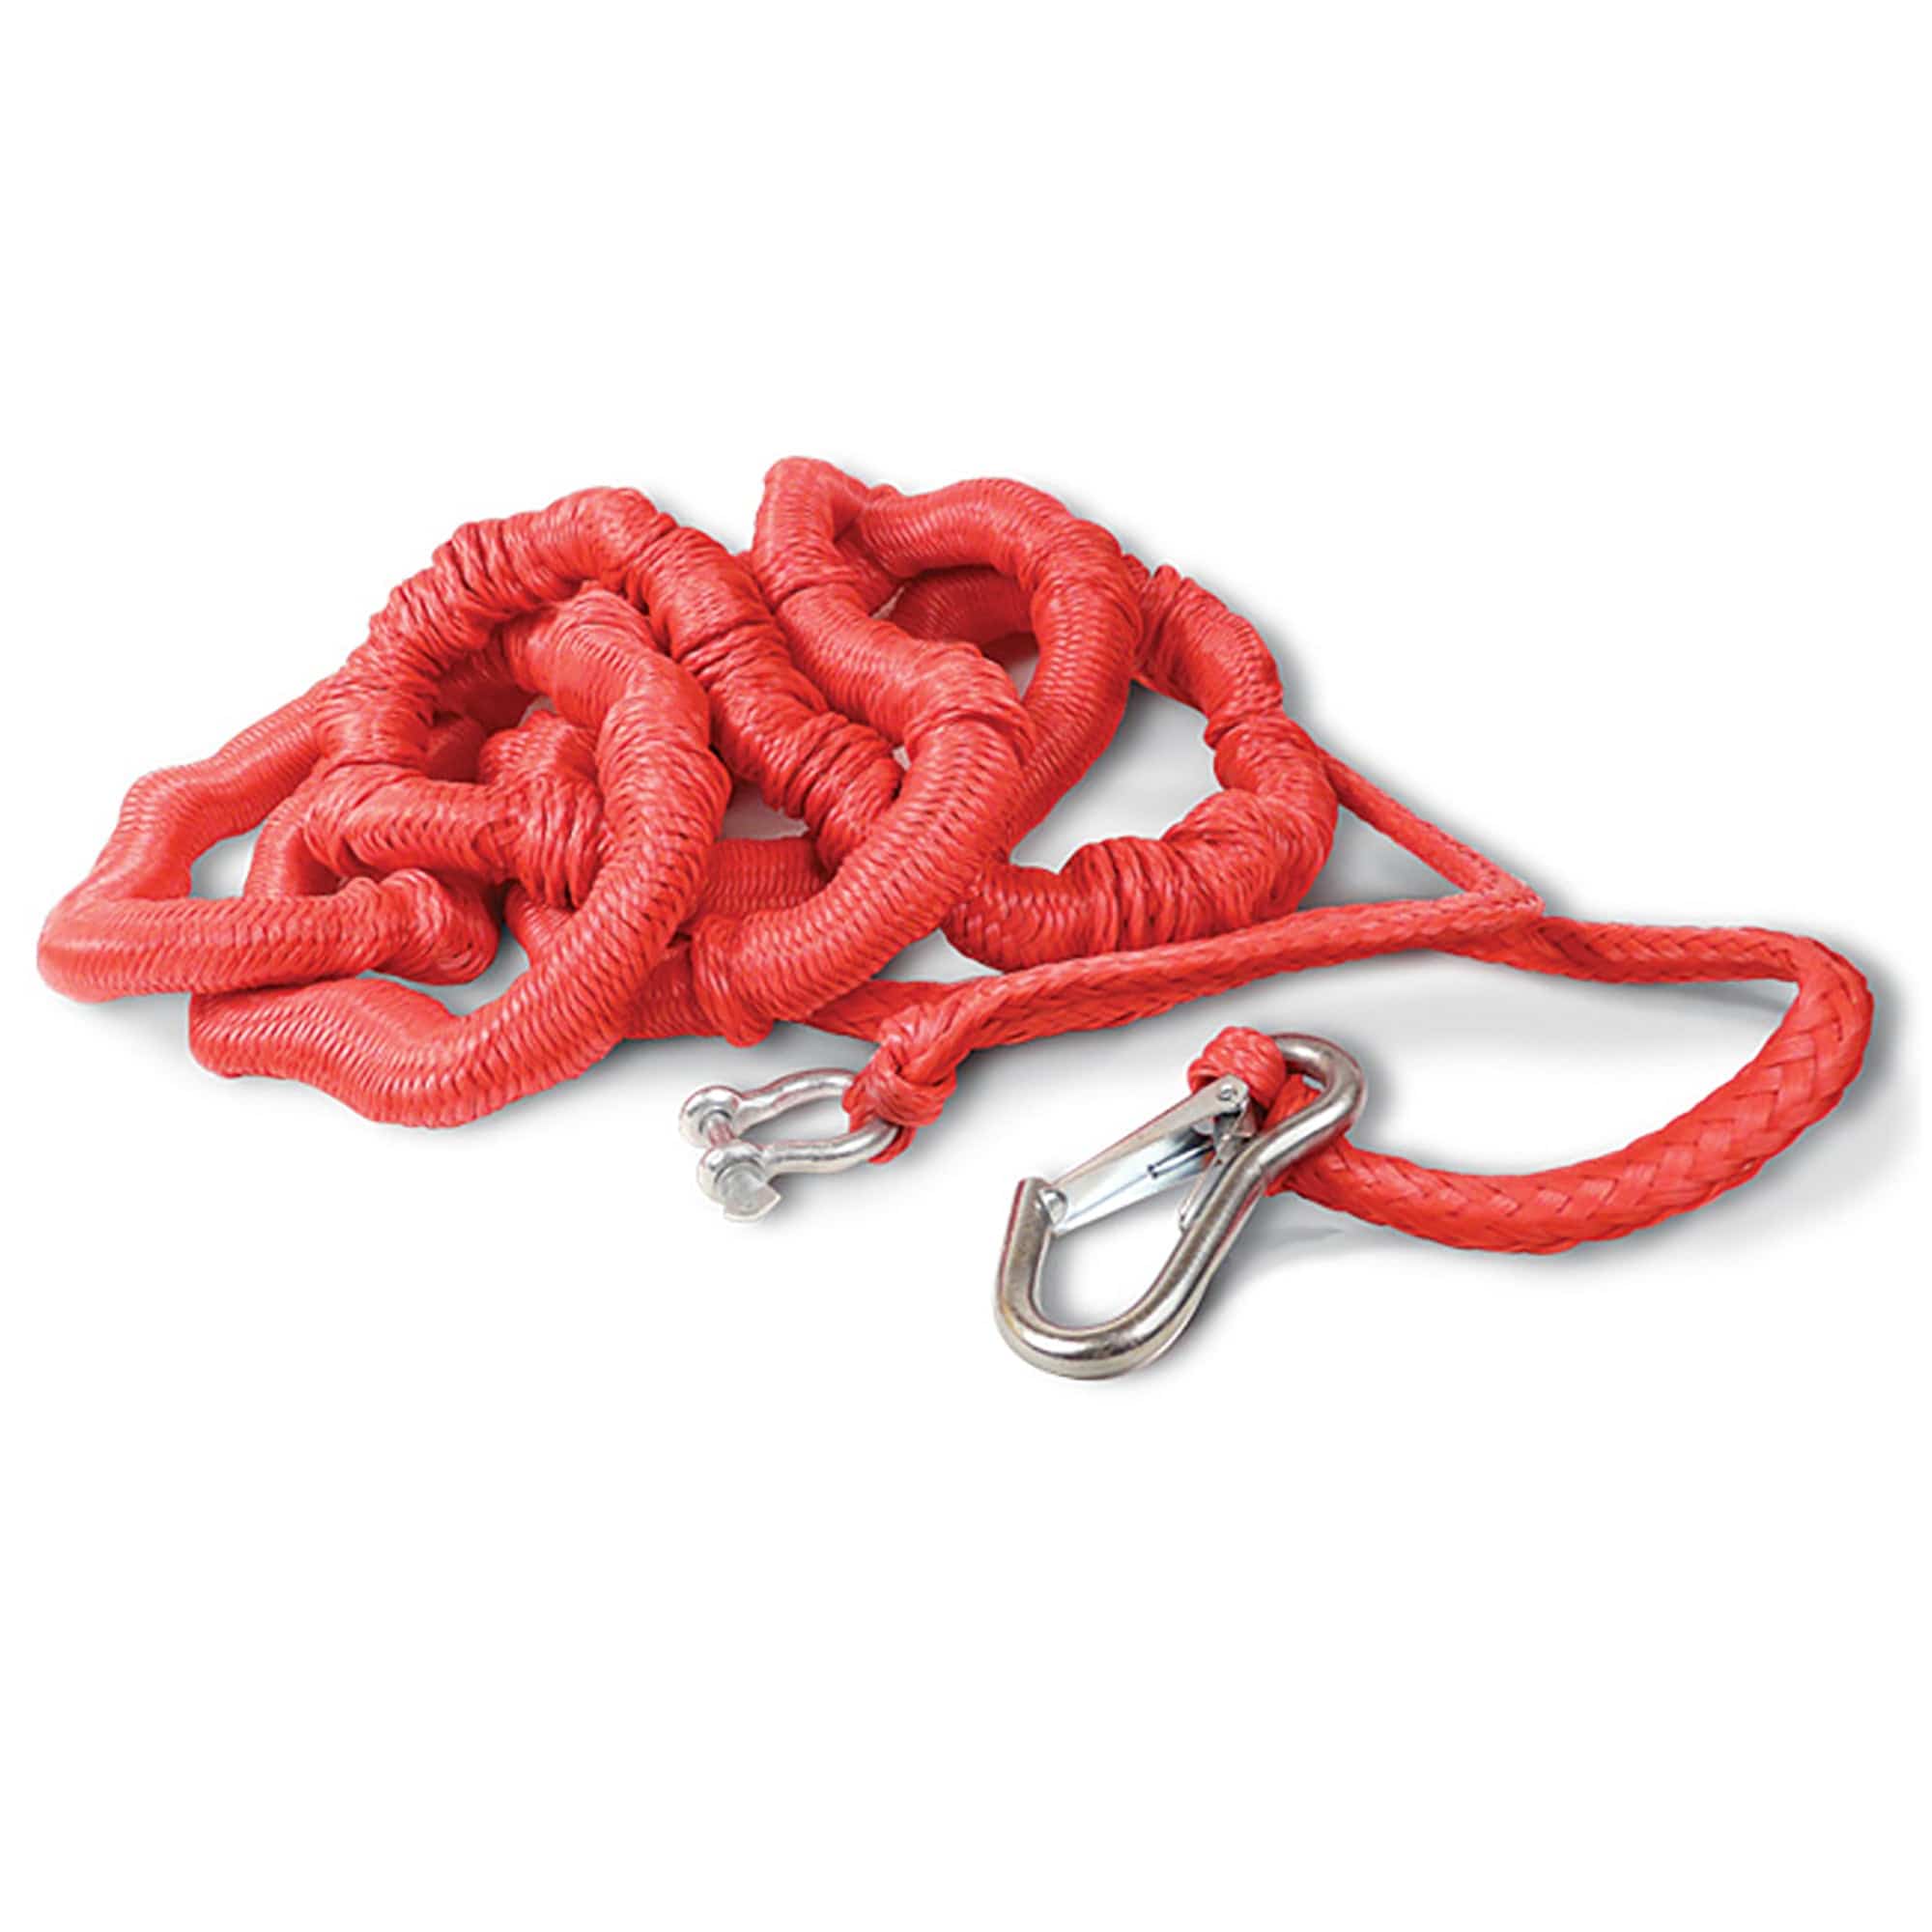 14'-50' Anchor Buddy - Red Poly Bungie Cord AB4000-RD Greenfield Products